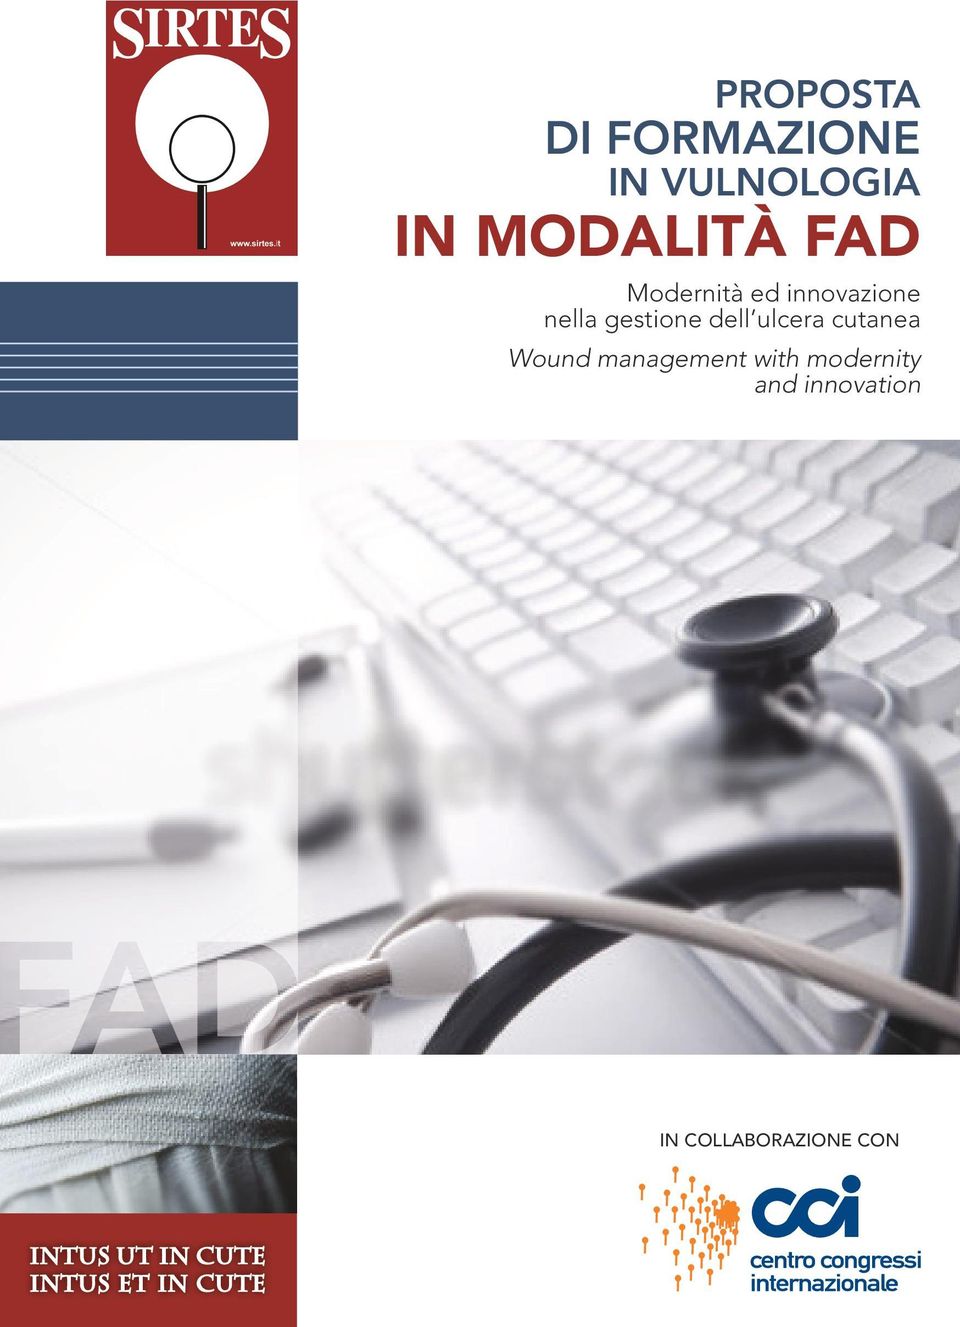 cutanea Wound management with modernity and